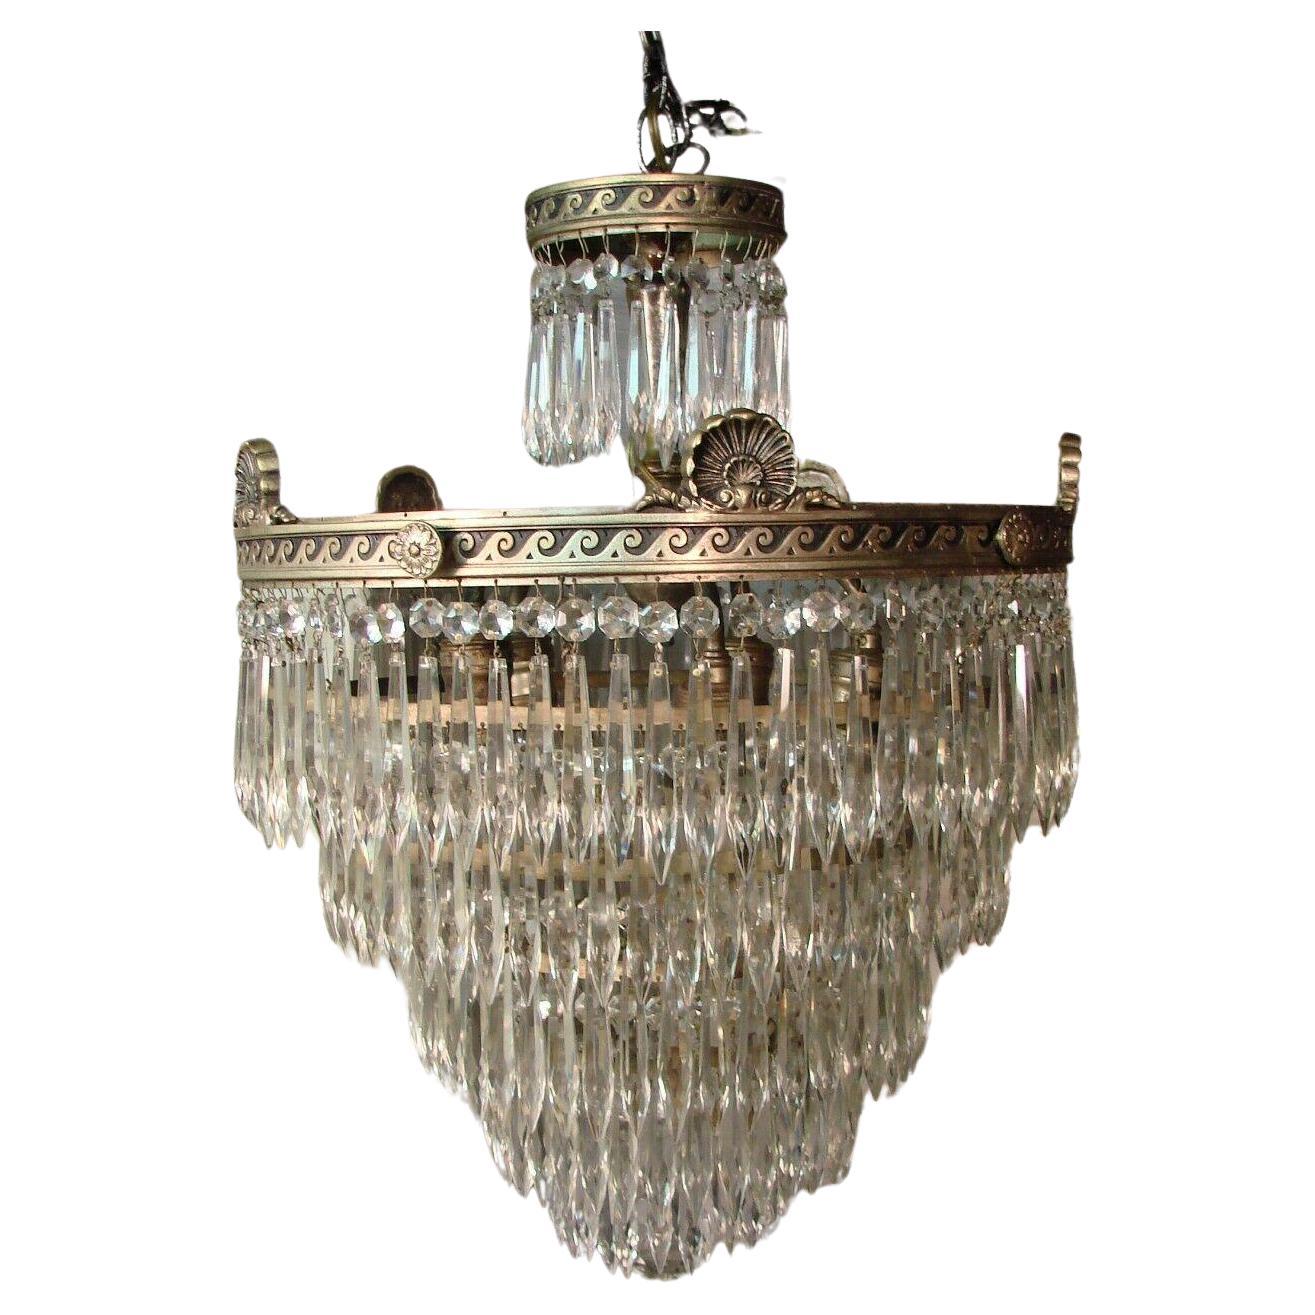 1940s Regency/ Rococo 5 Tiered Cascading Crystal Flush Mount/ Chandelier For Sale